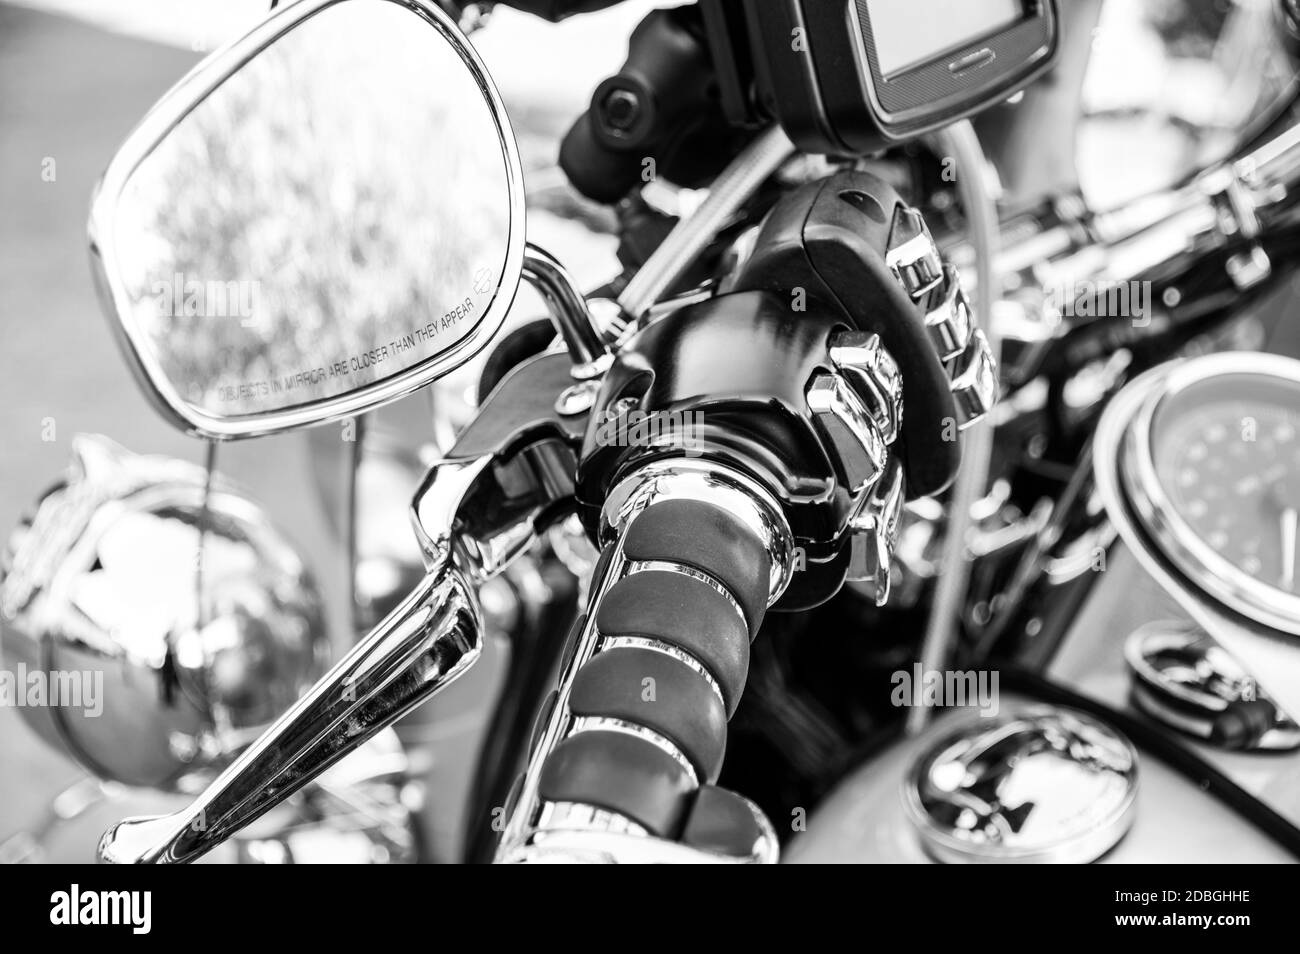 Motorcycle handlebar with rear-view mirror and buttons in black and white Stock Photo